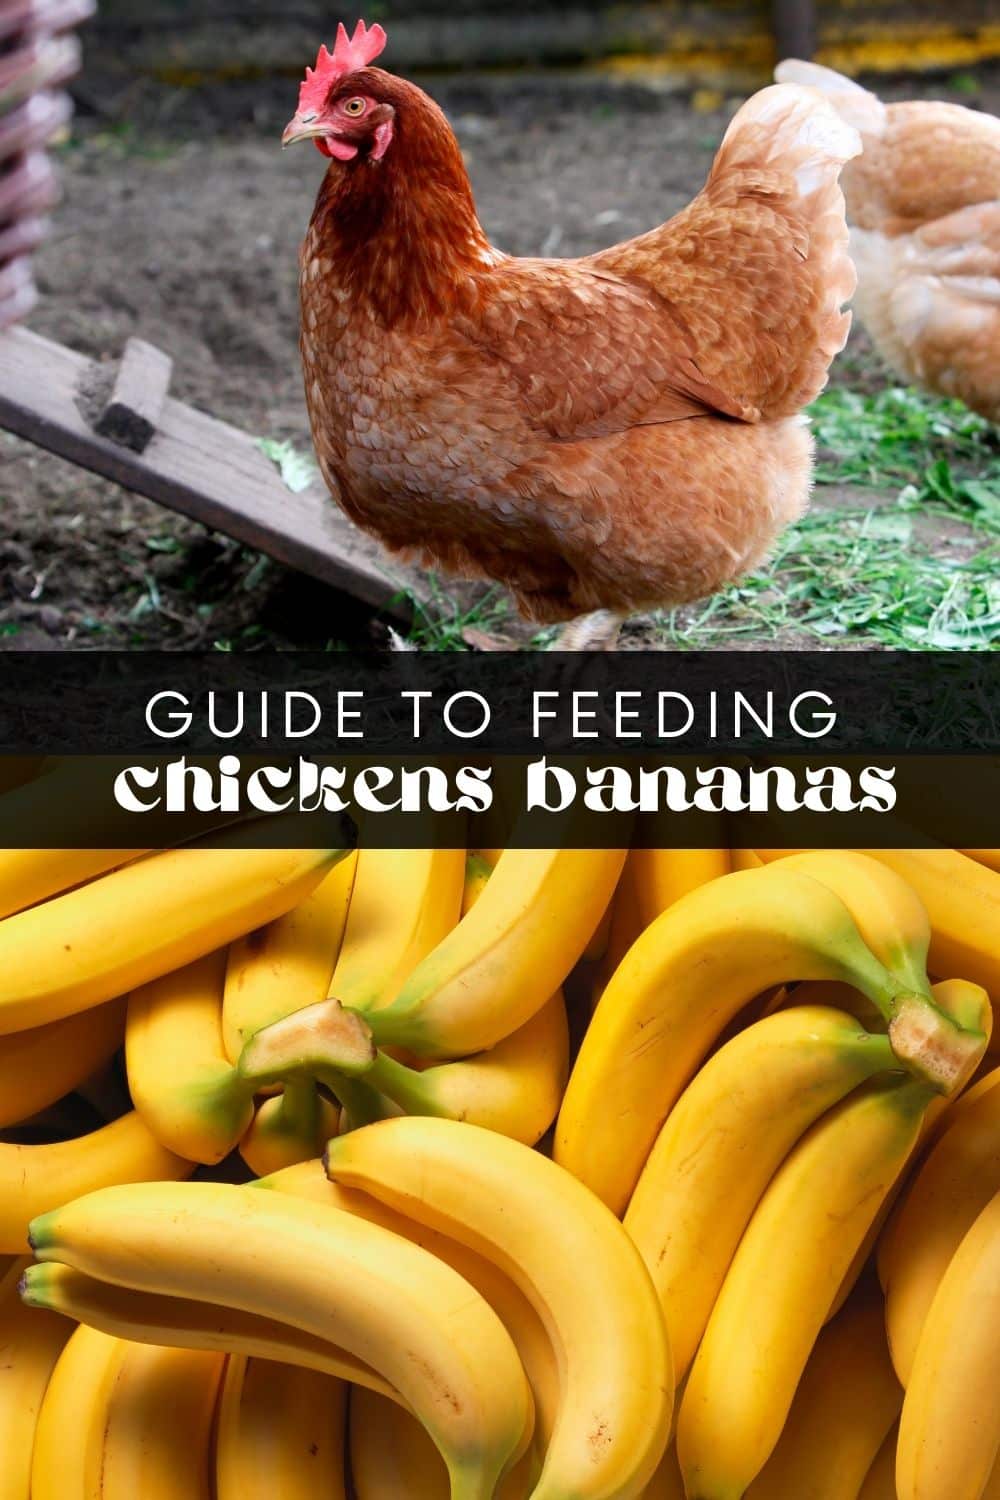 Chickens aren't known to be picky eaters, and will happily peck at almost anything you offer them. But can chickens eat bananas? The short answer is yes, they can! However, there are a few things to consider when feeding bananas to your flock.